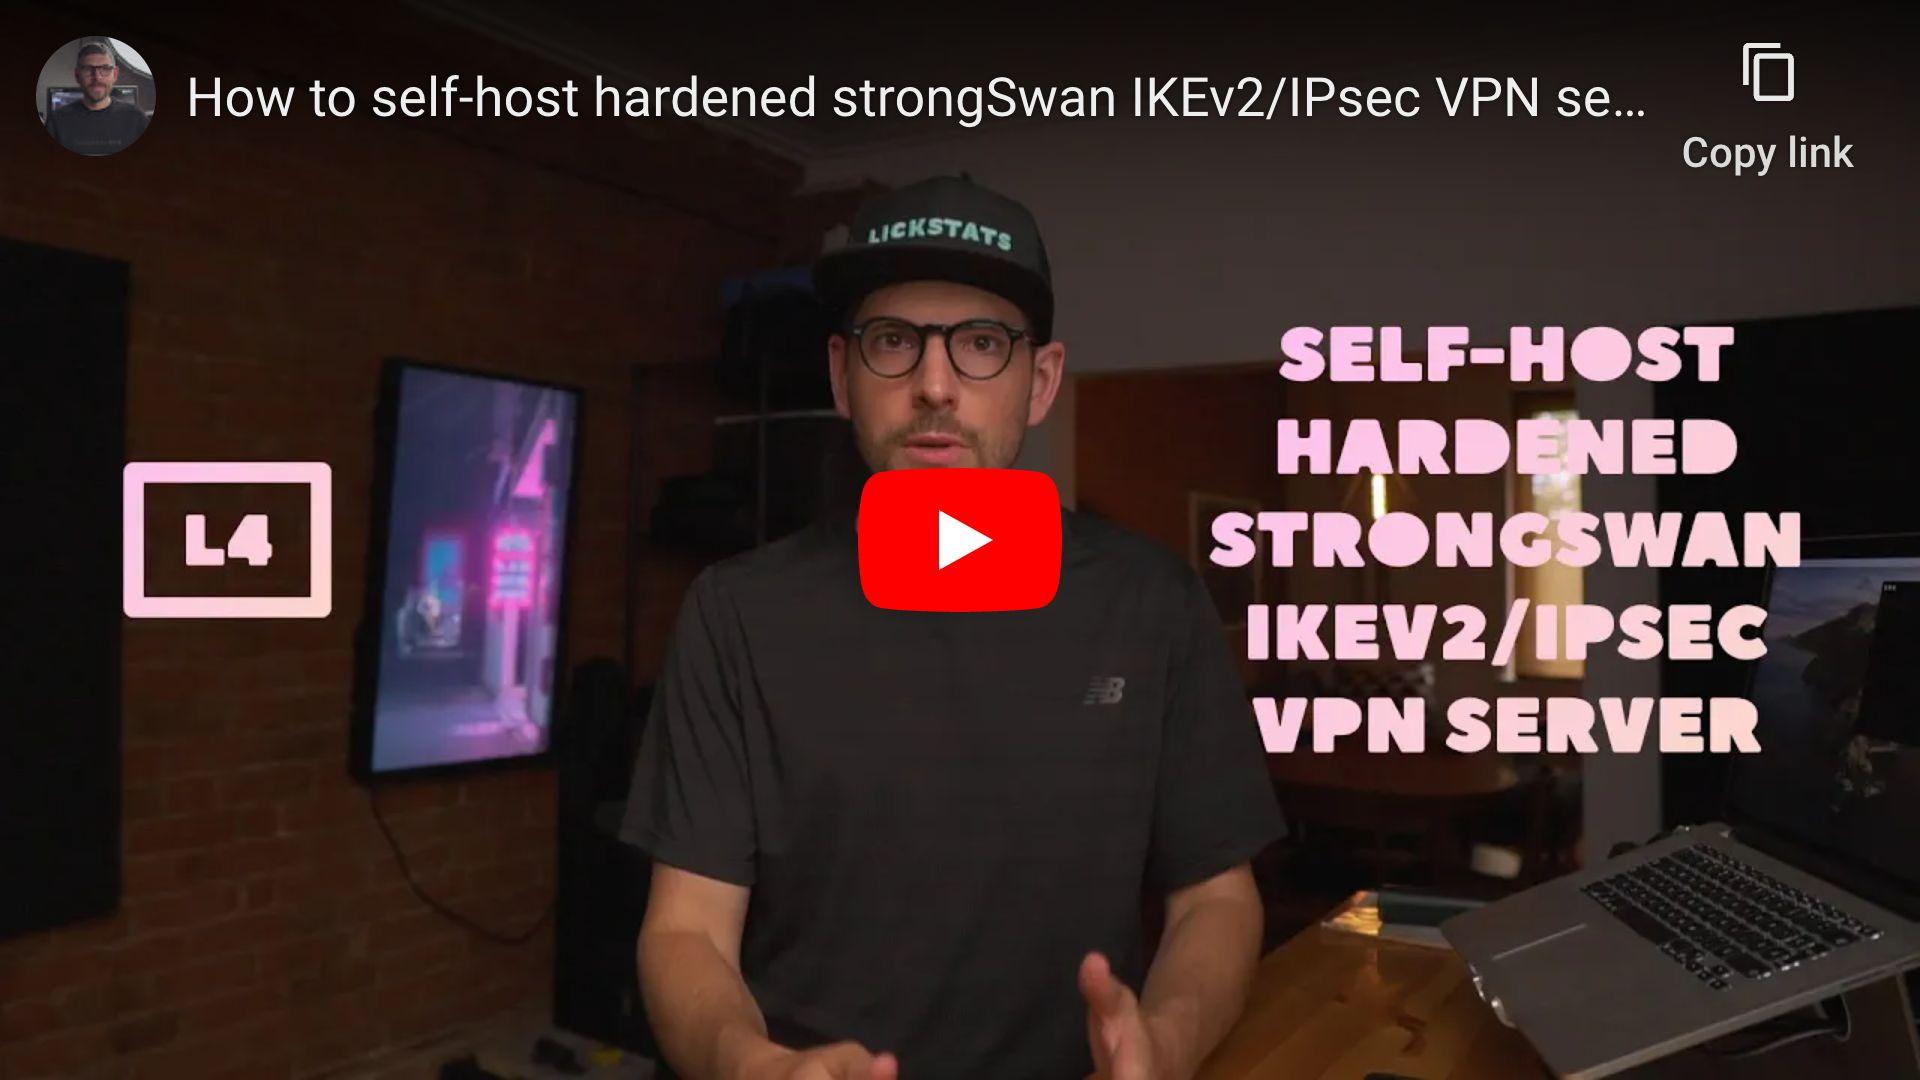 How to self-host hardened strongSwan IKEv2/IPsec VPN server for iOS and macOS